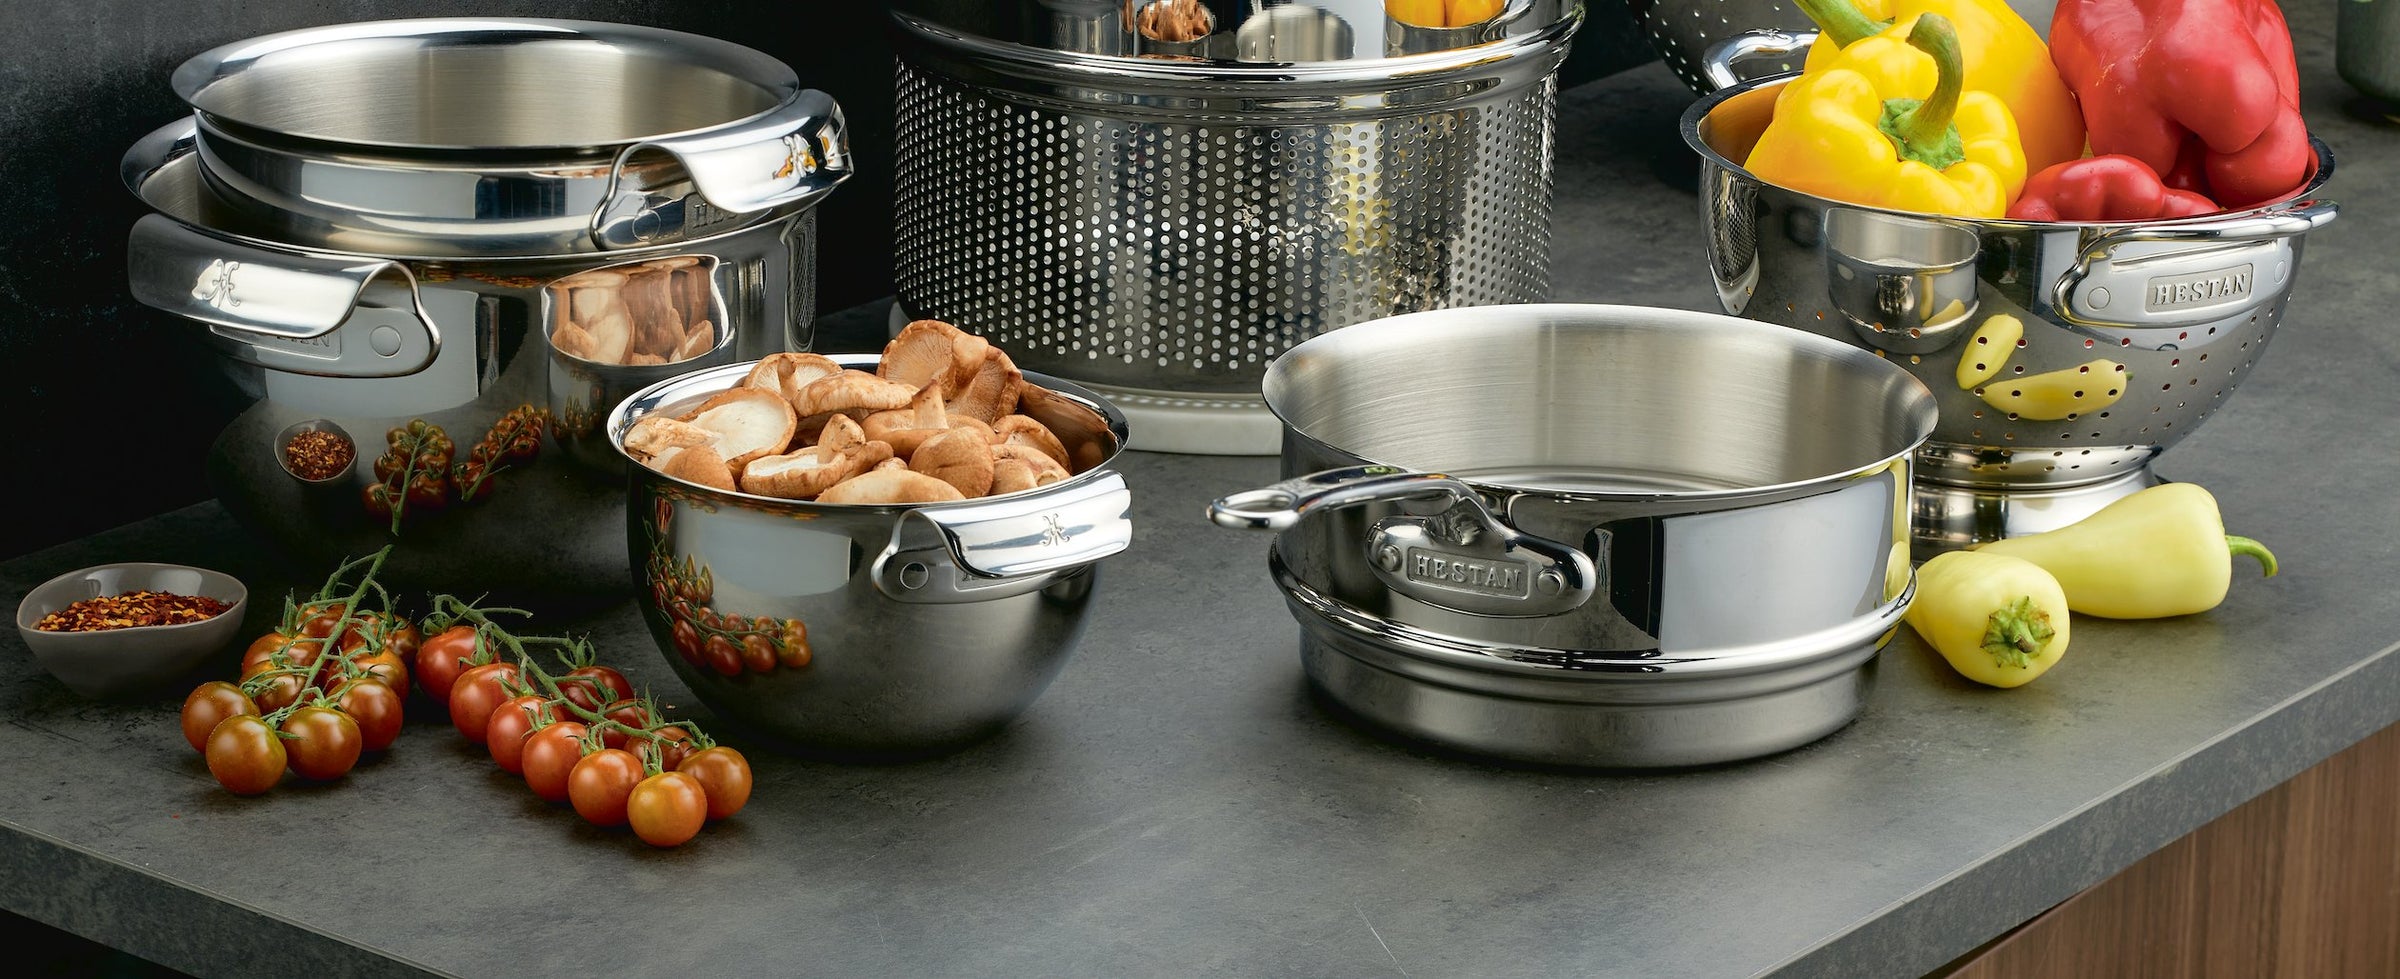 Hestan Provisions stainless steel cooking accessories